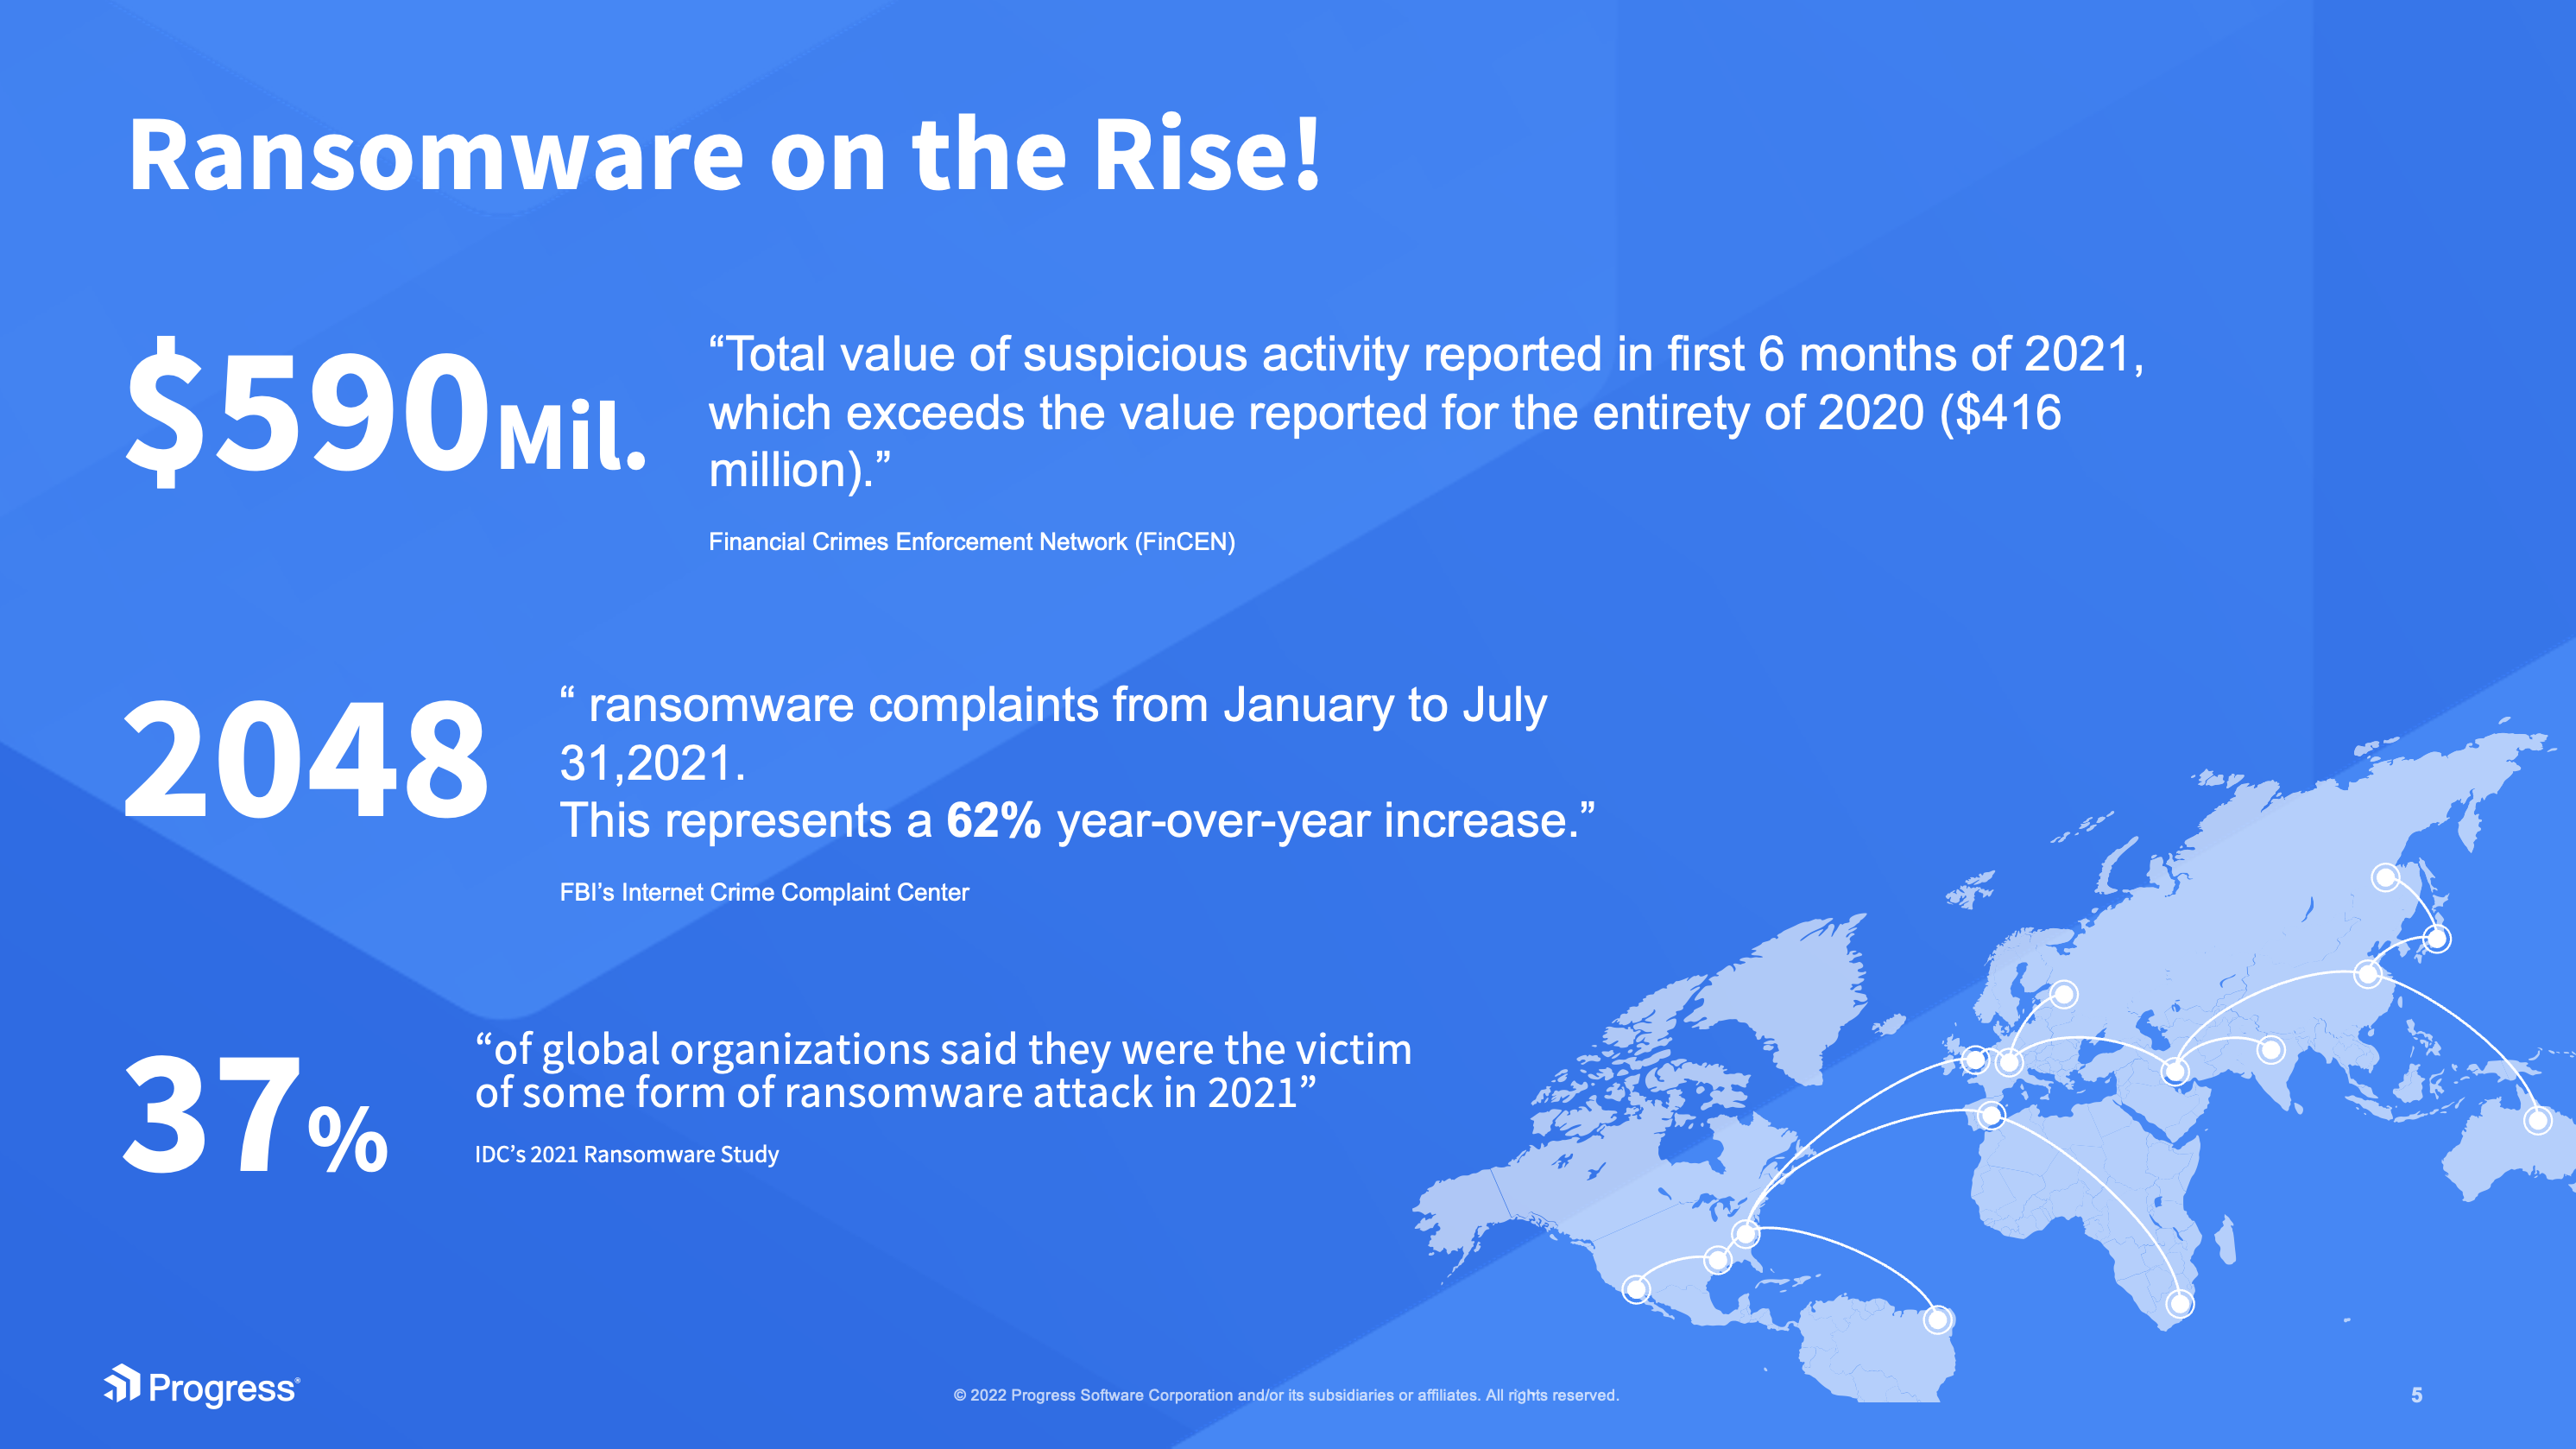 Ransomware is on the Rise! Here is how Network Detection and Response (NDR) can Address the Ransomware  